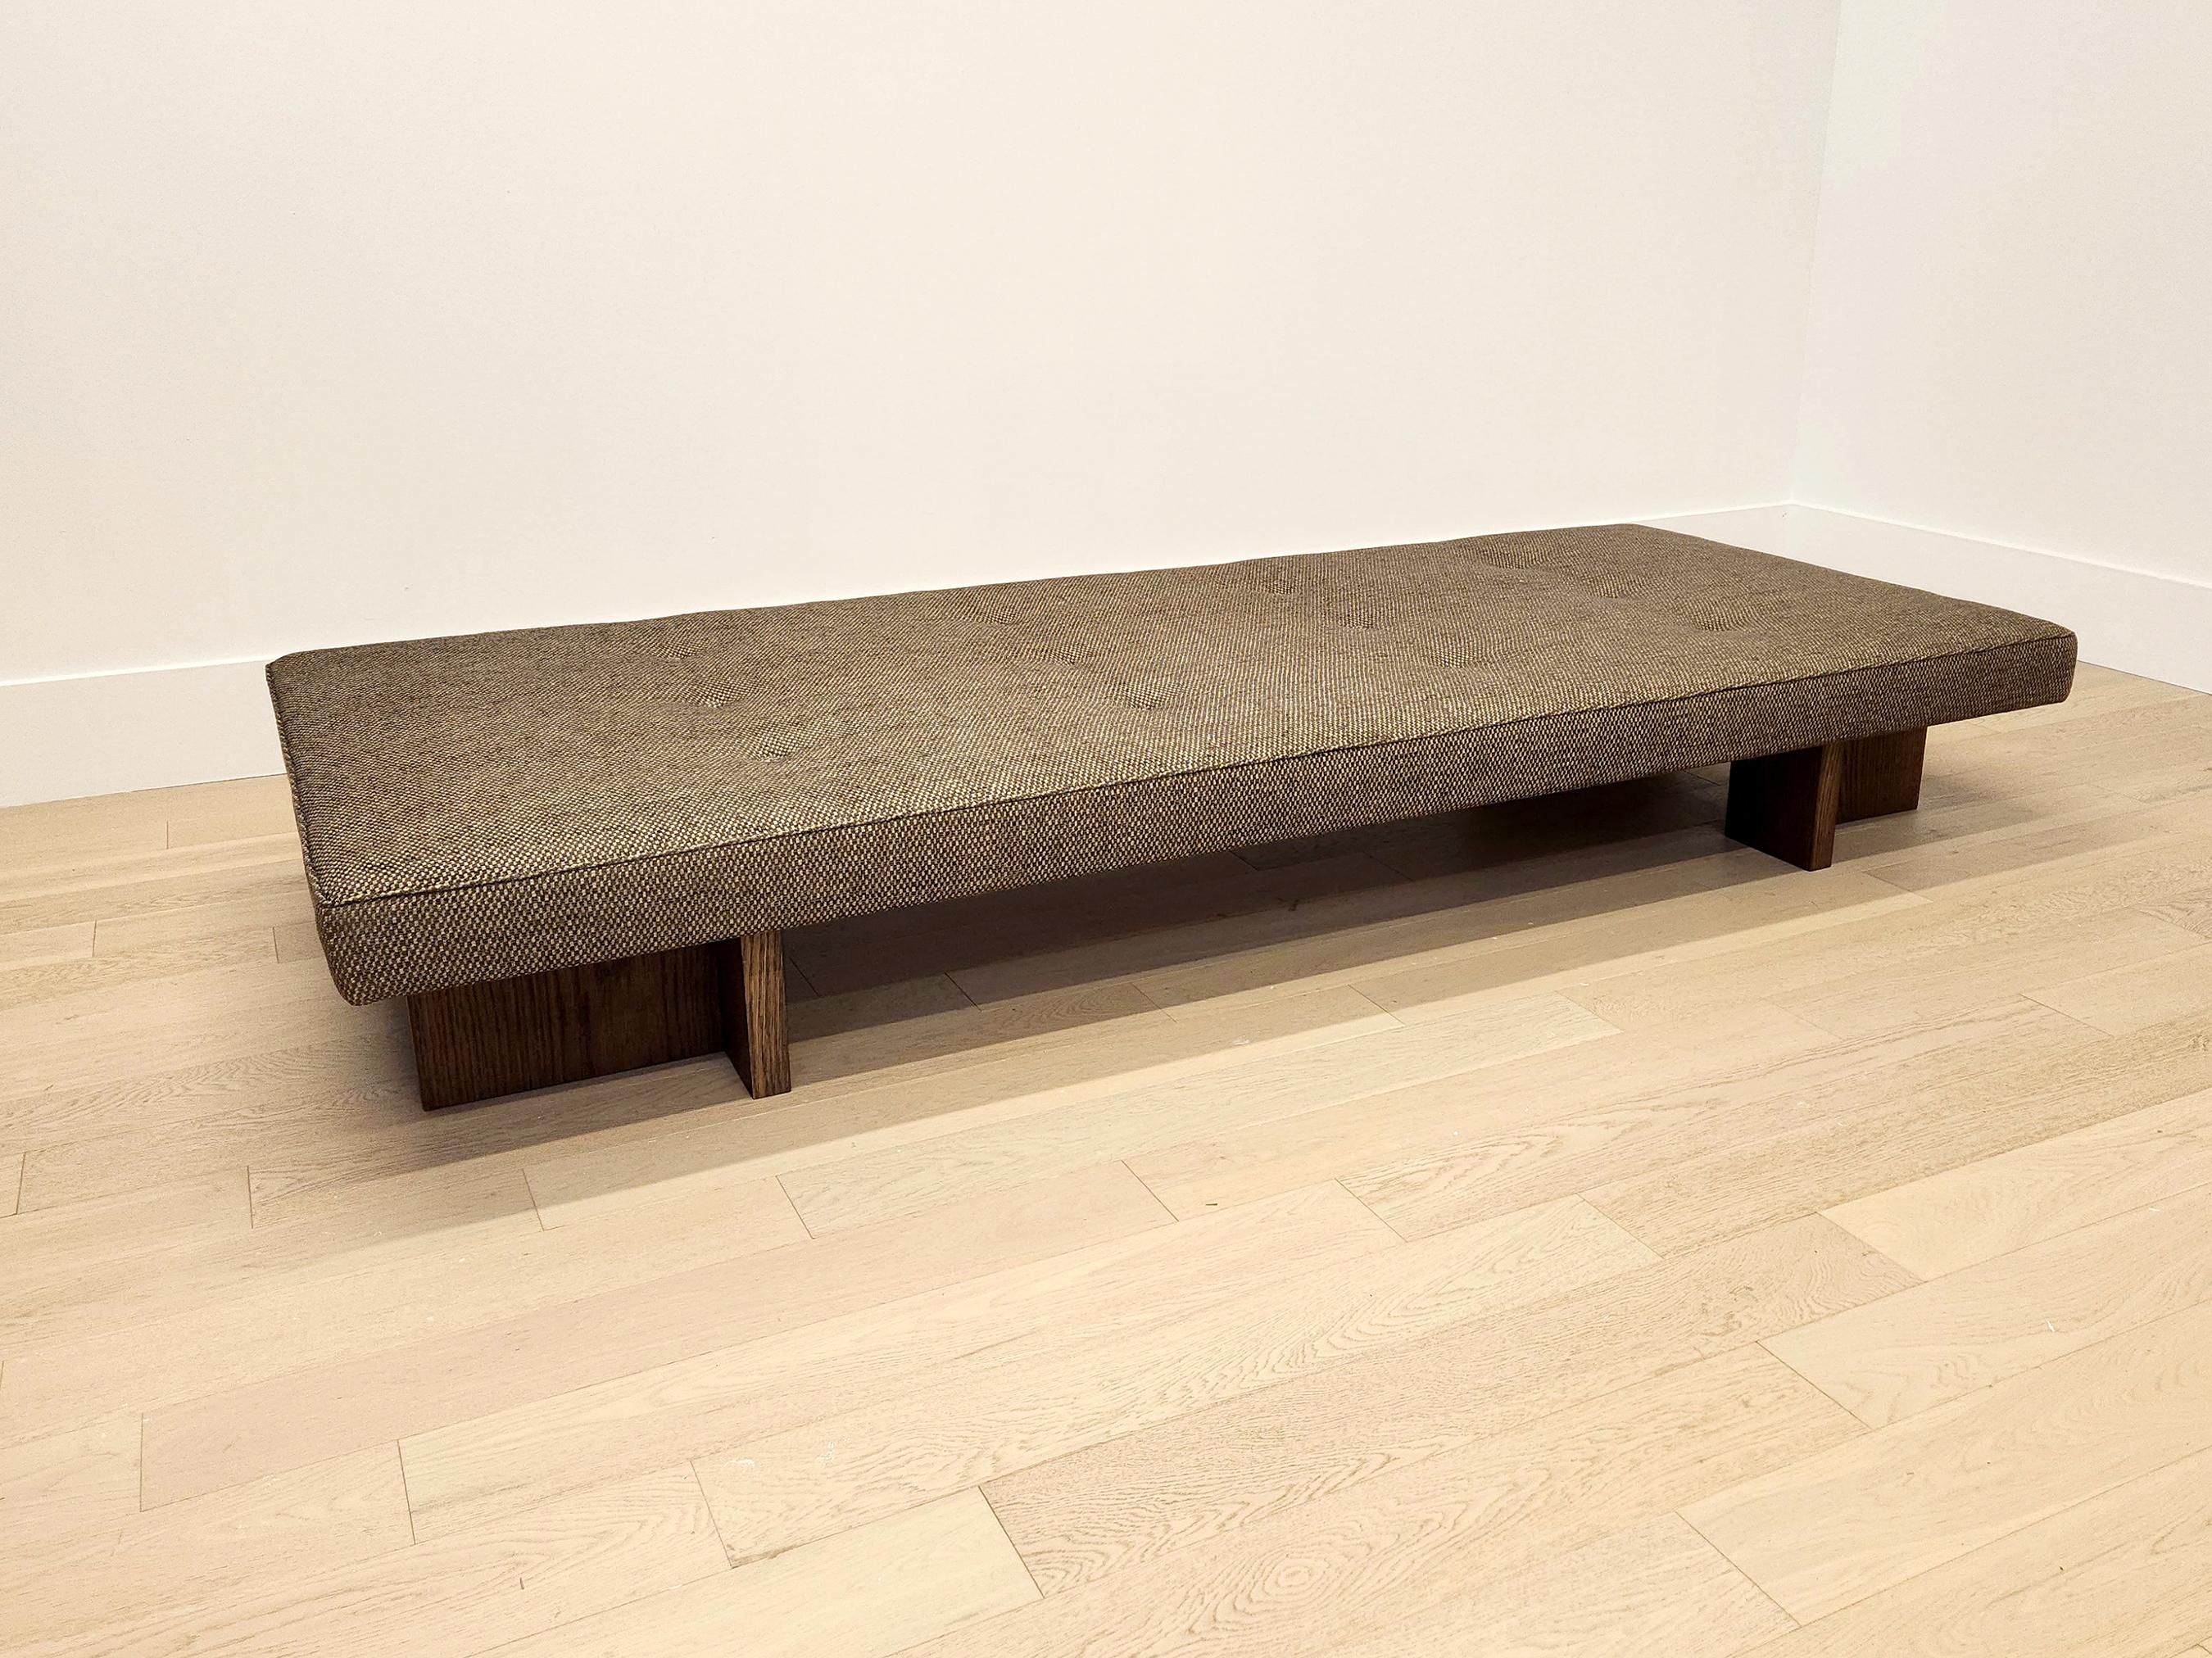 American Custom Made Gueridon Day Bed with Client's Own Fabric COM, Choice of Wood Stain For Sale